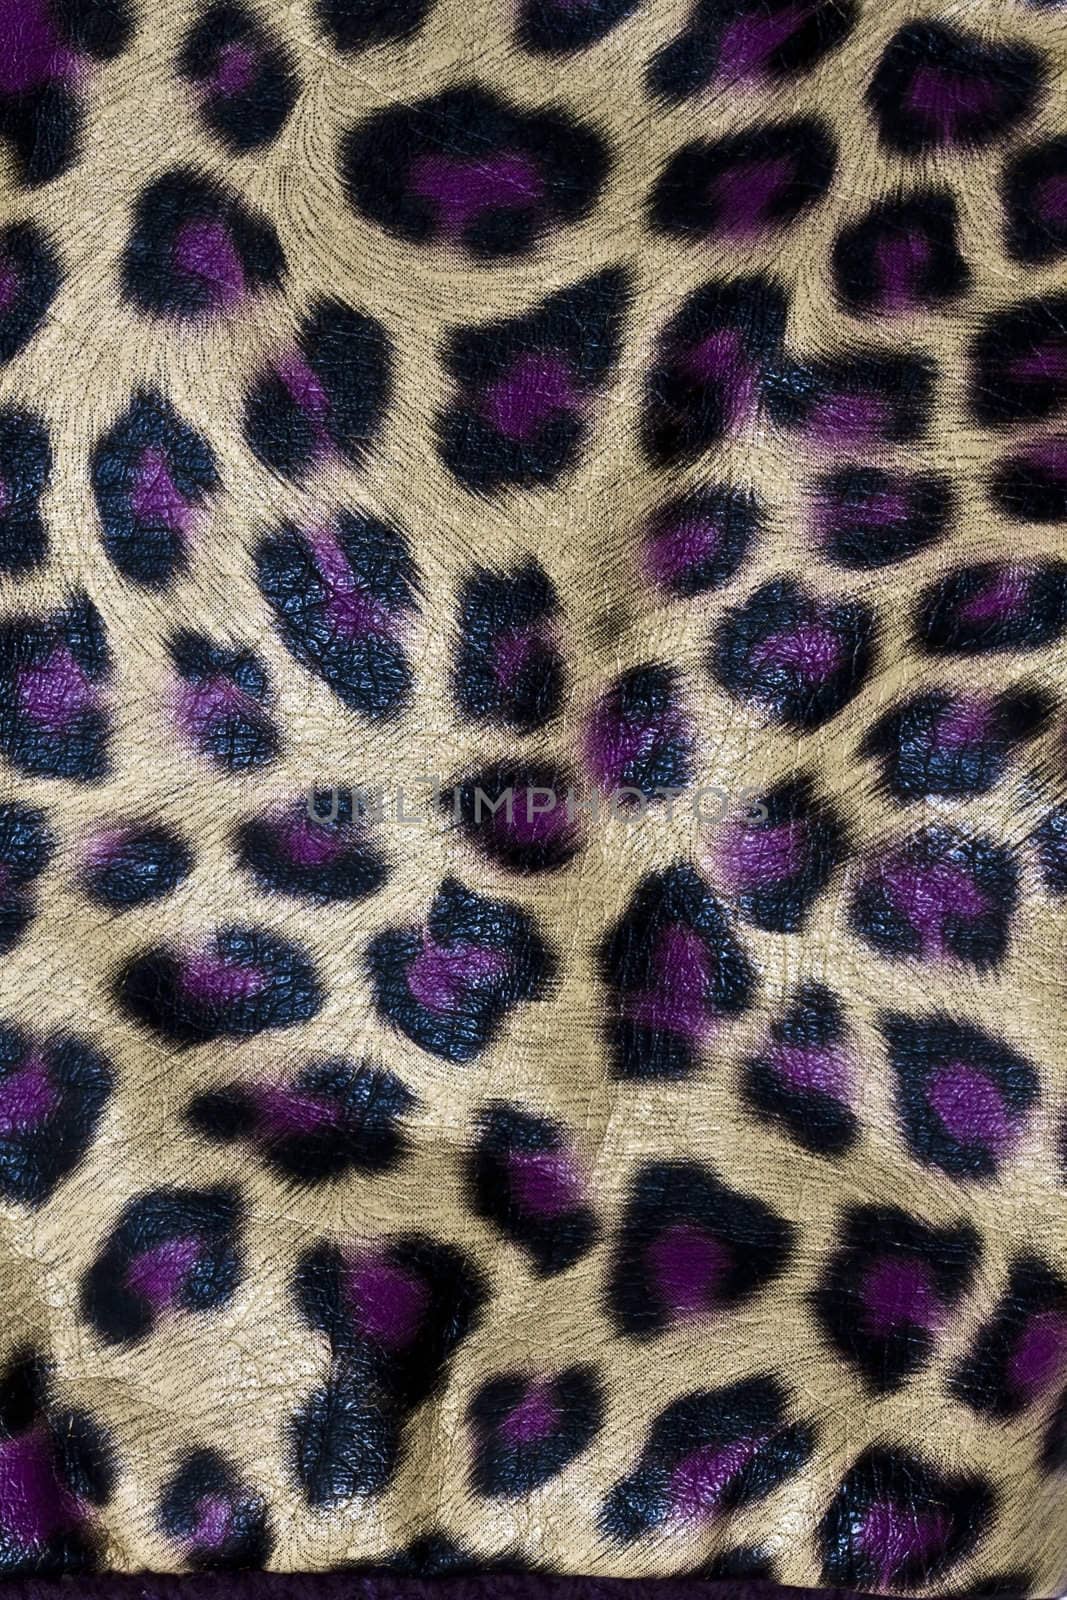 Leopardskin Pattern fabric background  by ibphoto